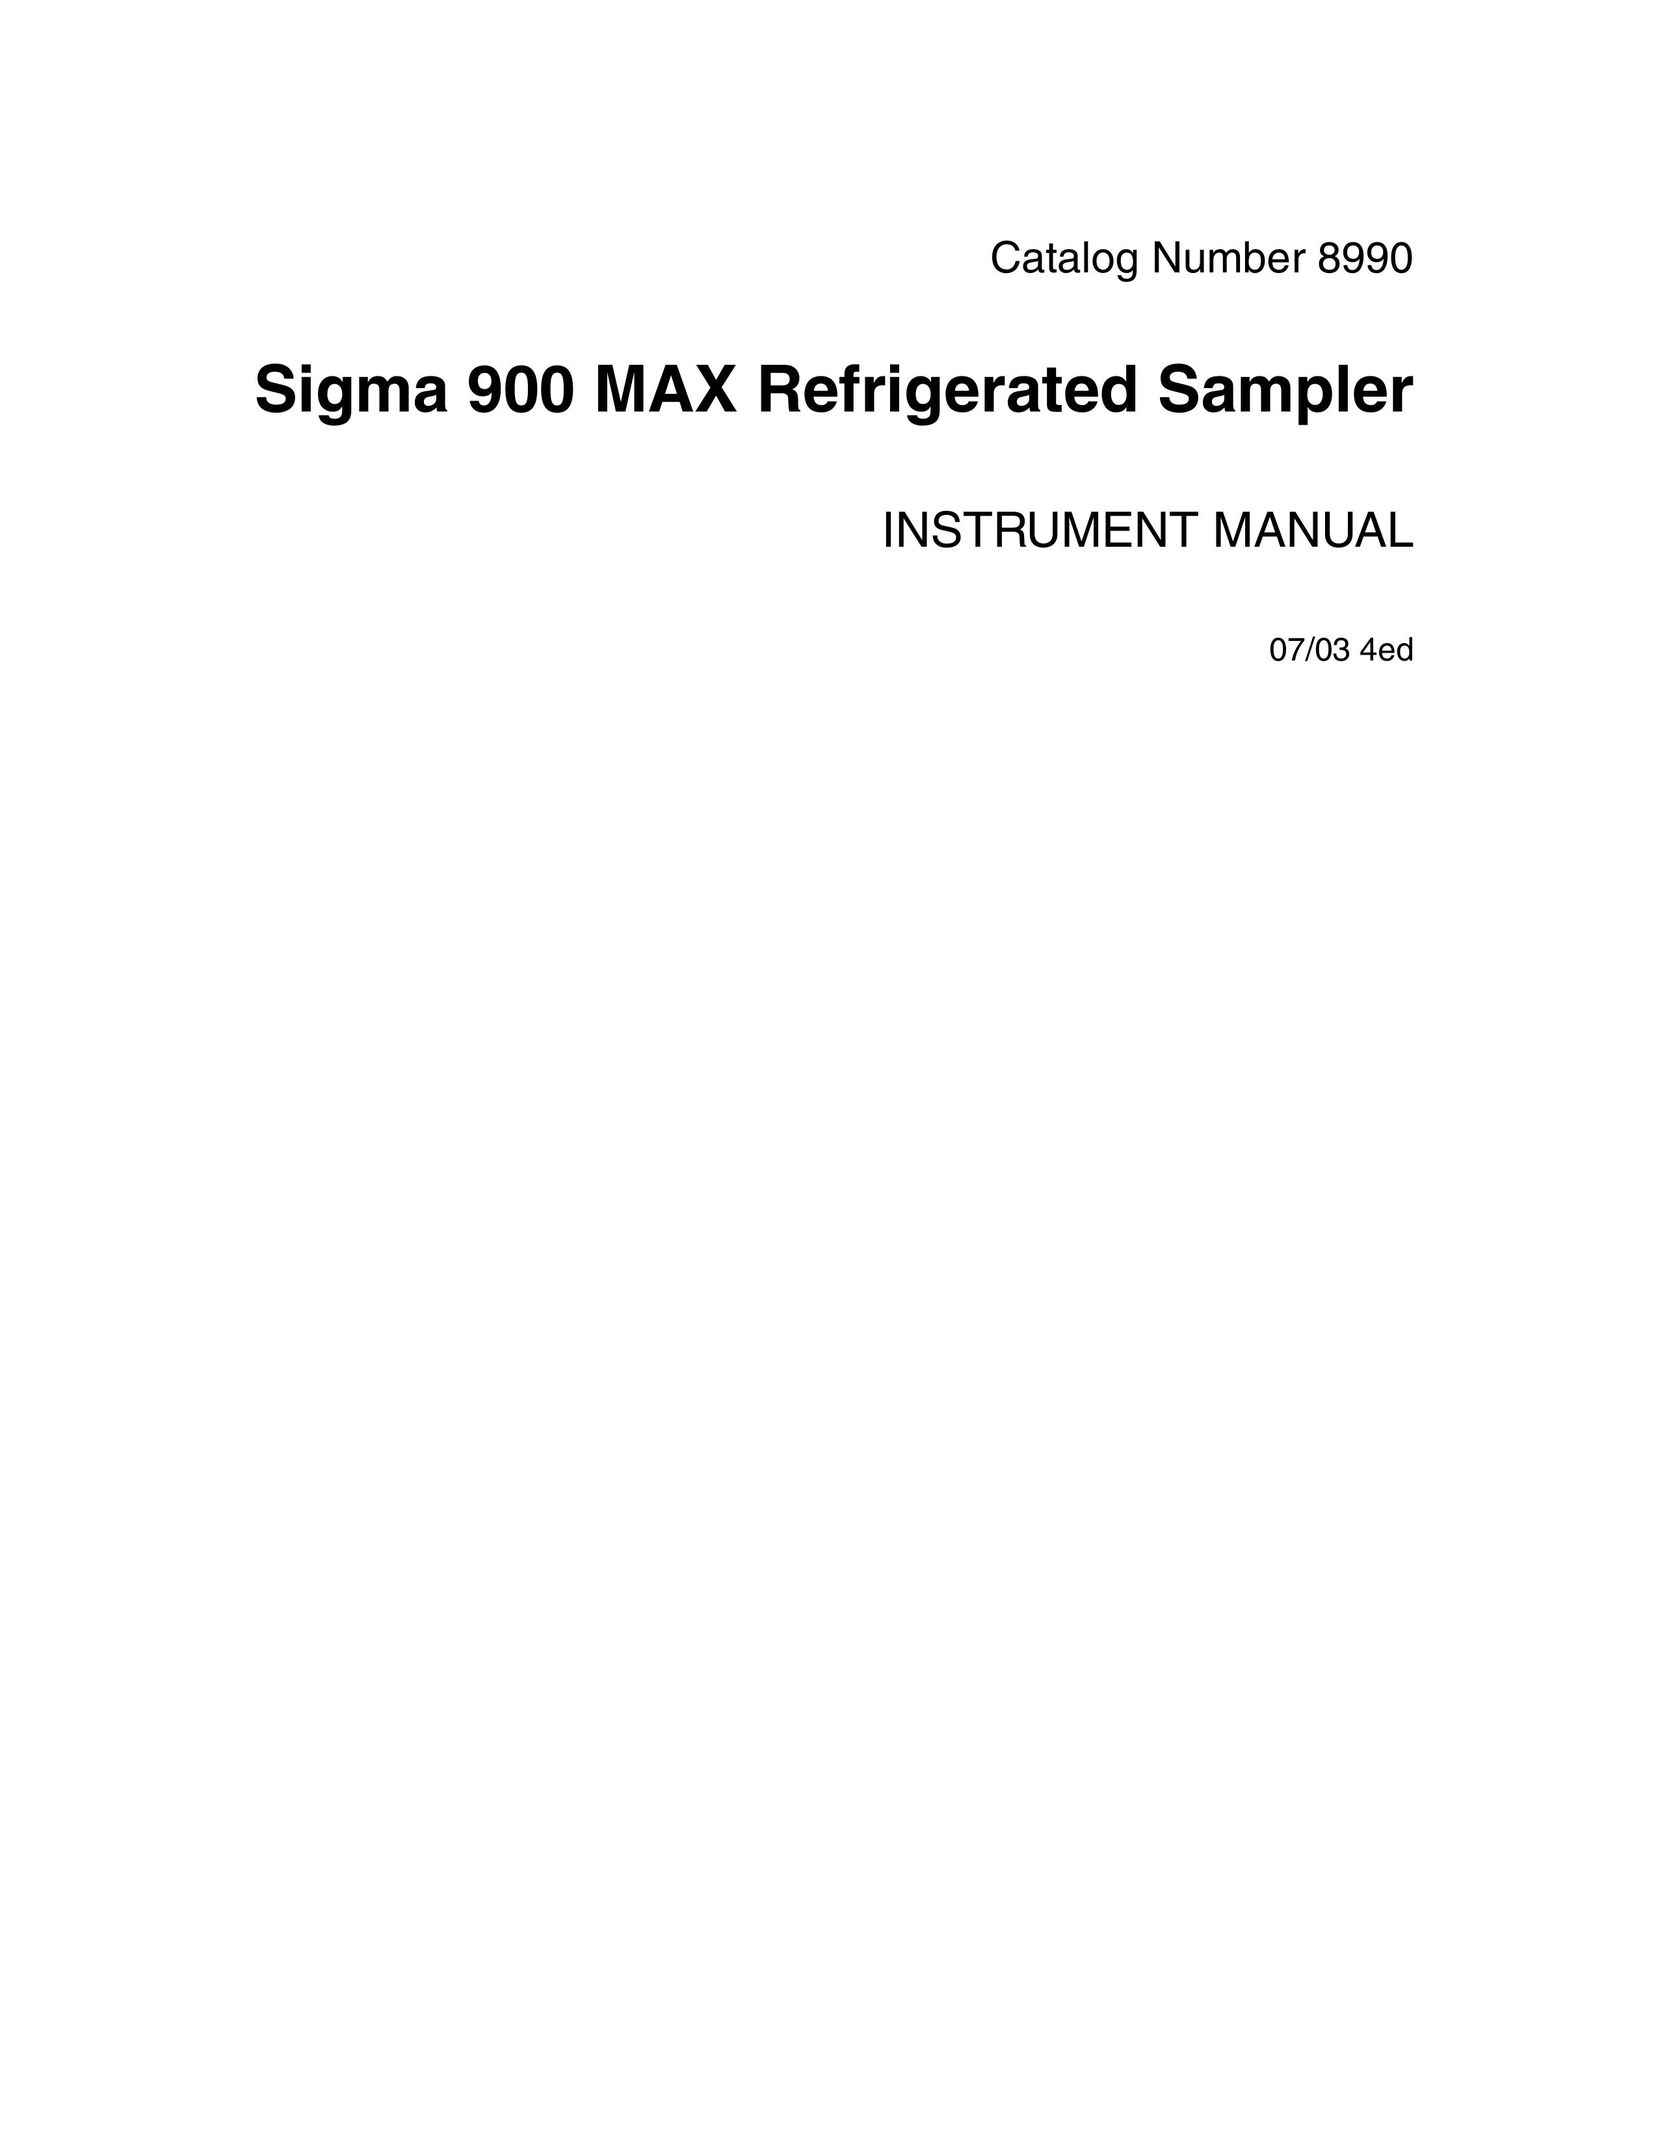 Hach 900 MAX Water Heater User Manual